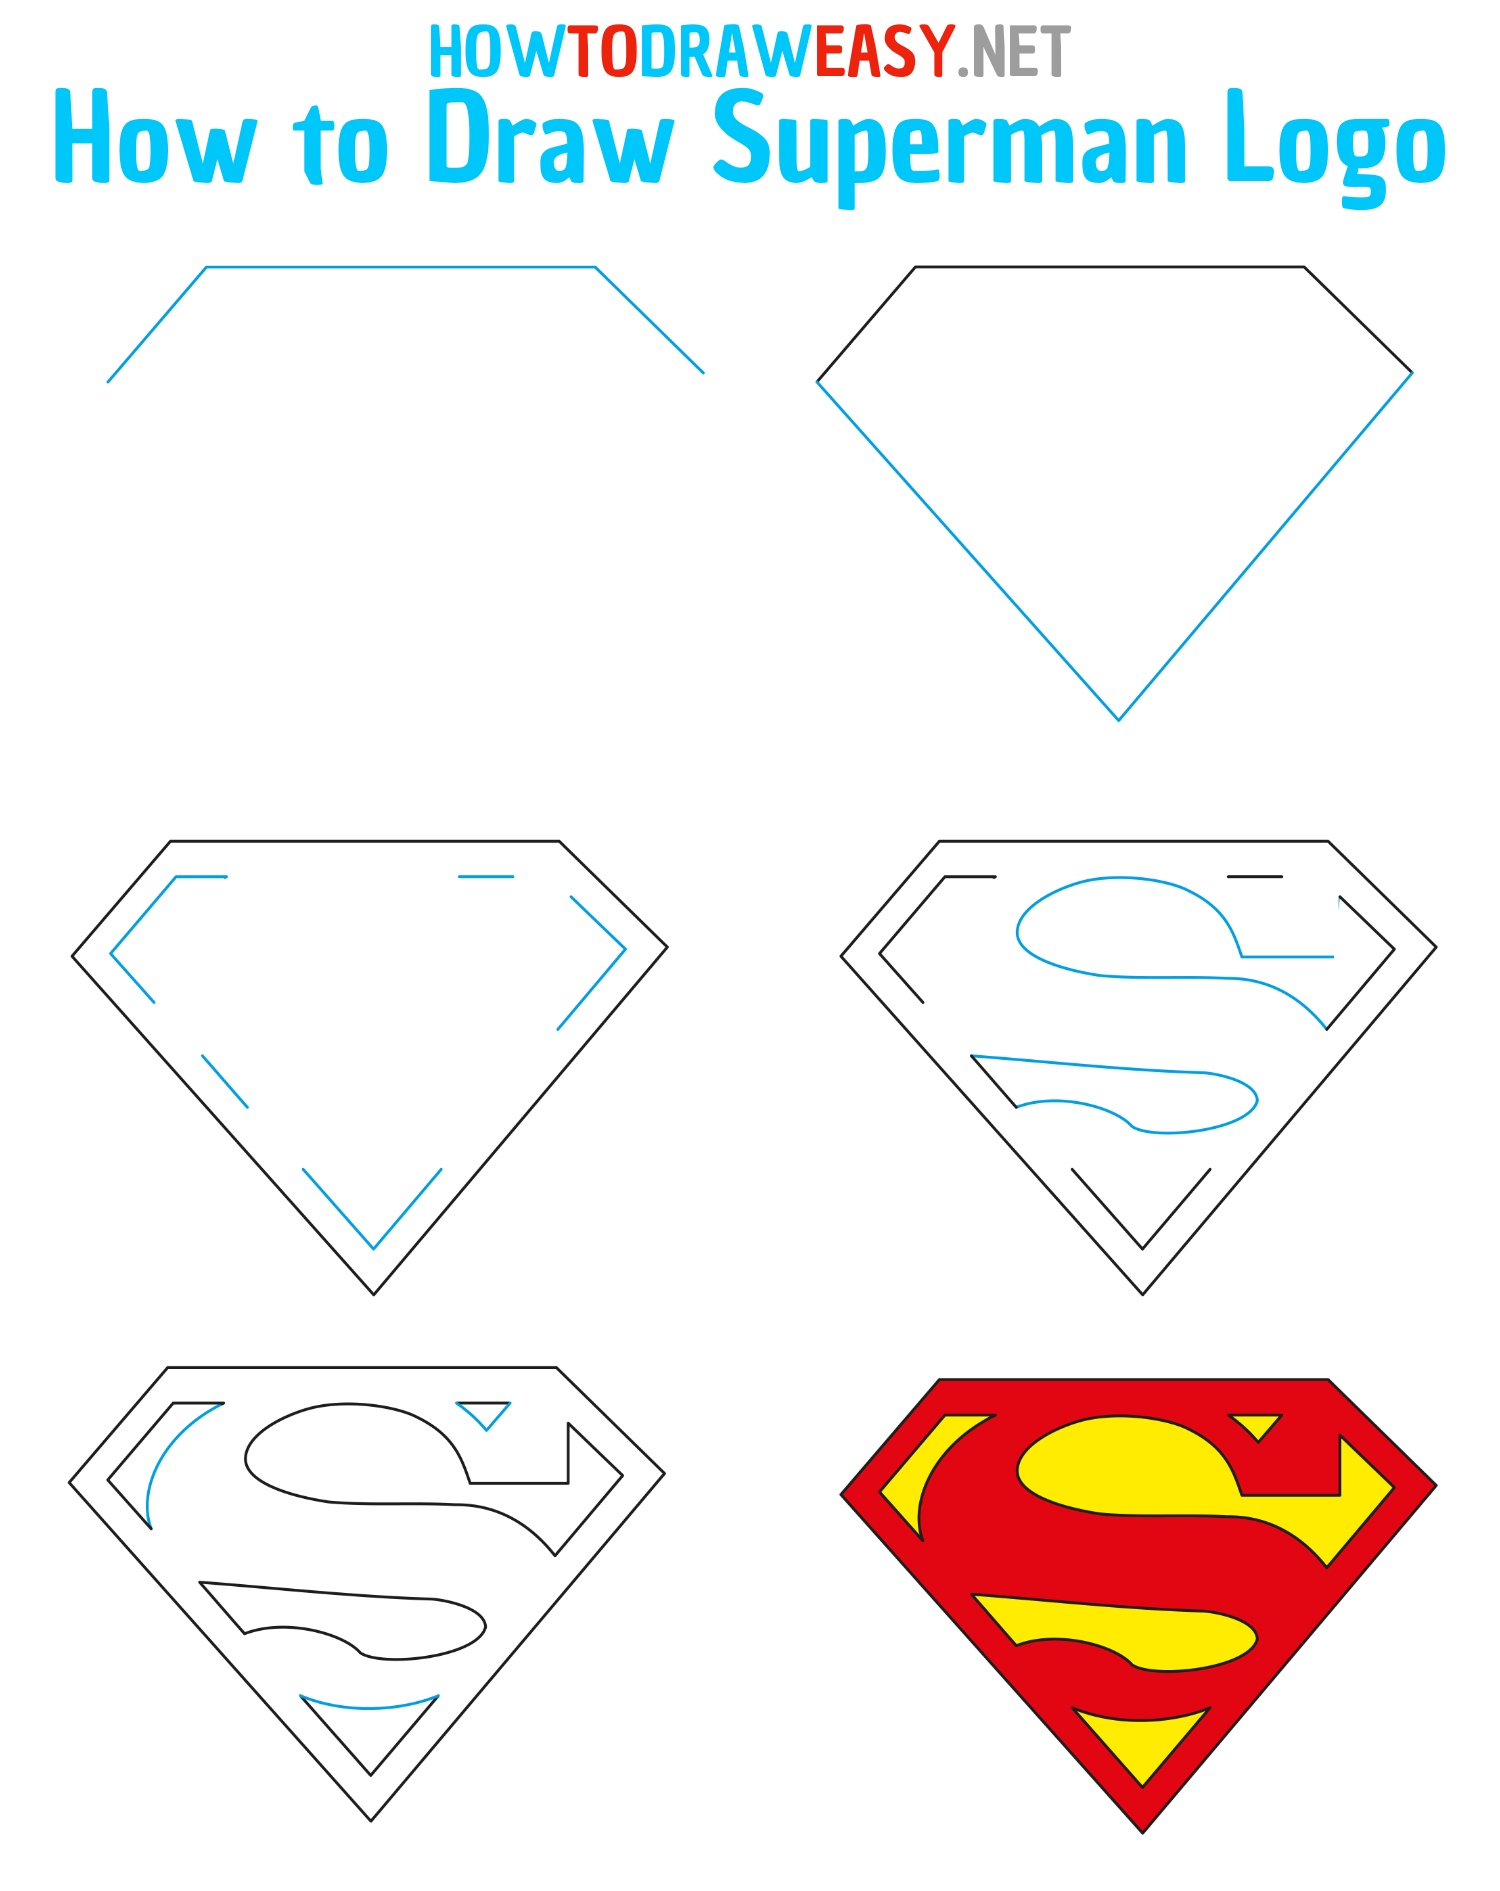 How to Draw Superman Logo Step by Step